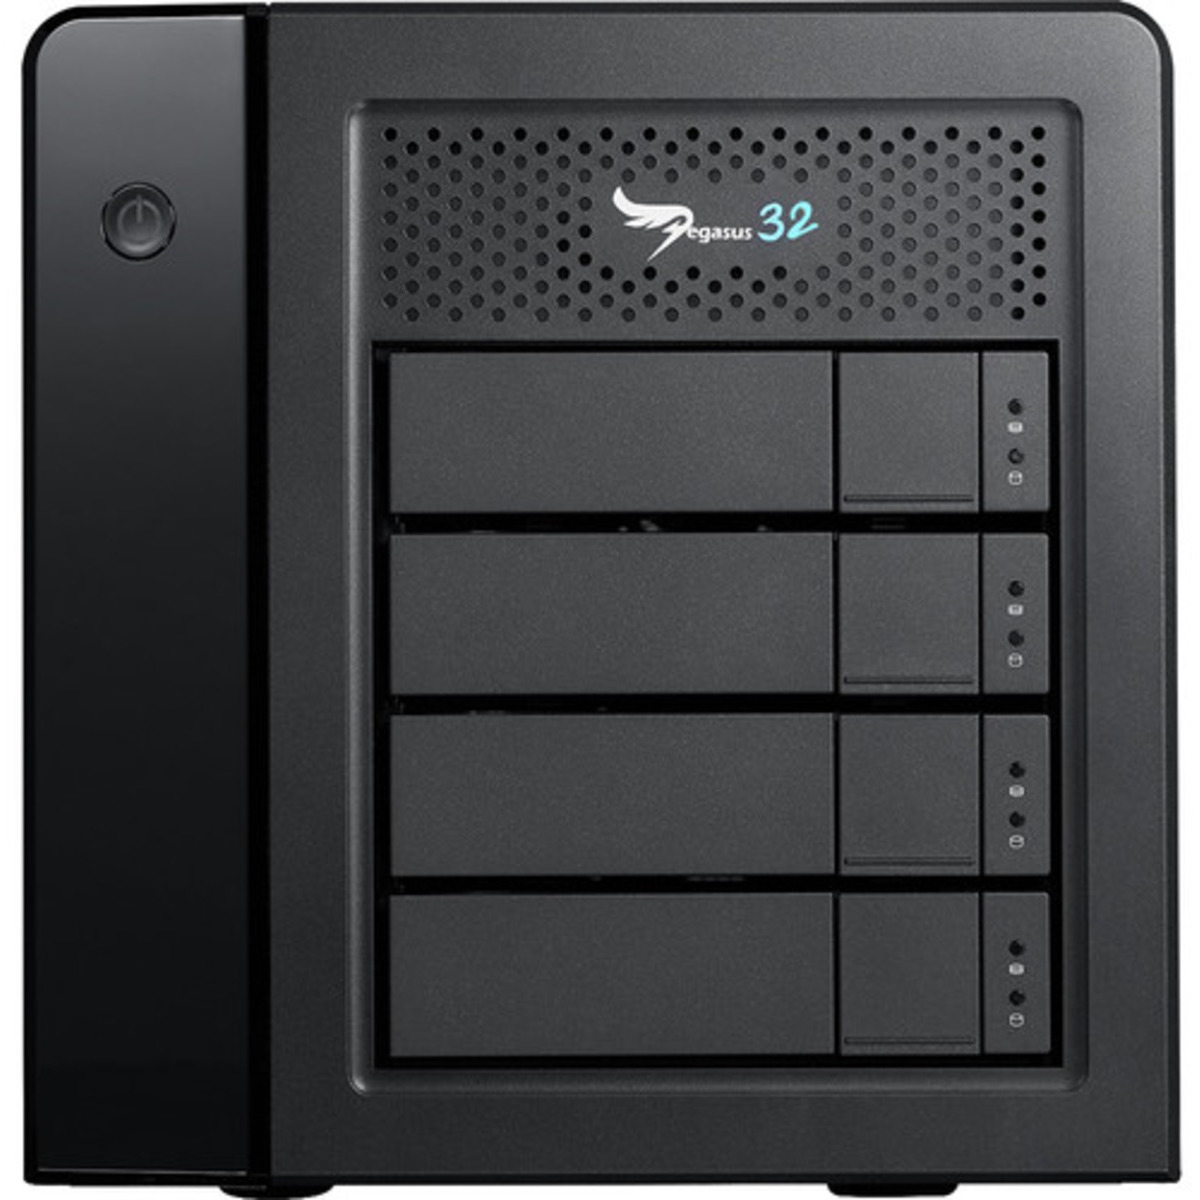 Promise Technology Pegasus32 R4 Thunderbolt 3 48tb 4-Bay Desktop Multimedia / Power User / Business DAS - Direct Attached Storage Device 4x12tb Seagate IronWolf Pro ST12000NT001 3.5 7200rpm SATA 6Gb/s HDD NAS Class Drives Installed - Burn-In Tested - ON SALE Pegasus32 R4 Thunderbolt 3